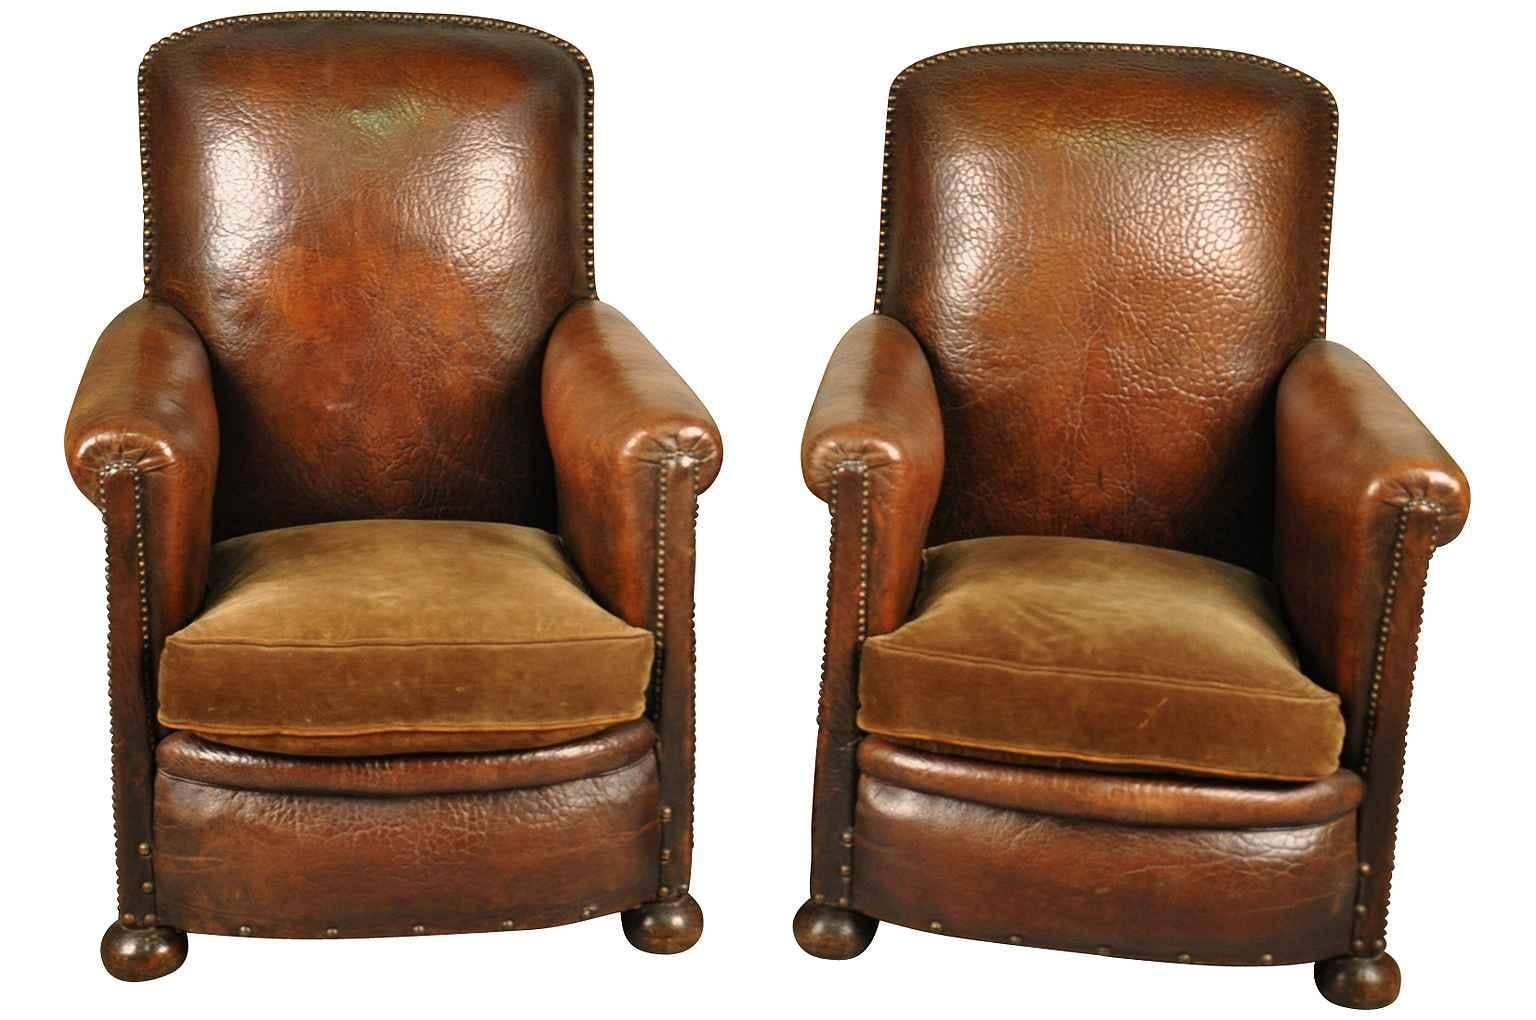 A fabulous pair of French Art Deco leather club chairs. Beautifully constructed with handsome nailhead detailing. Very sound and very comfortable.